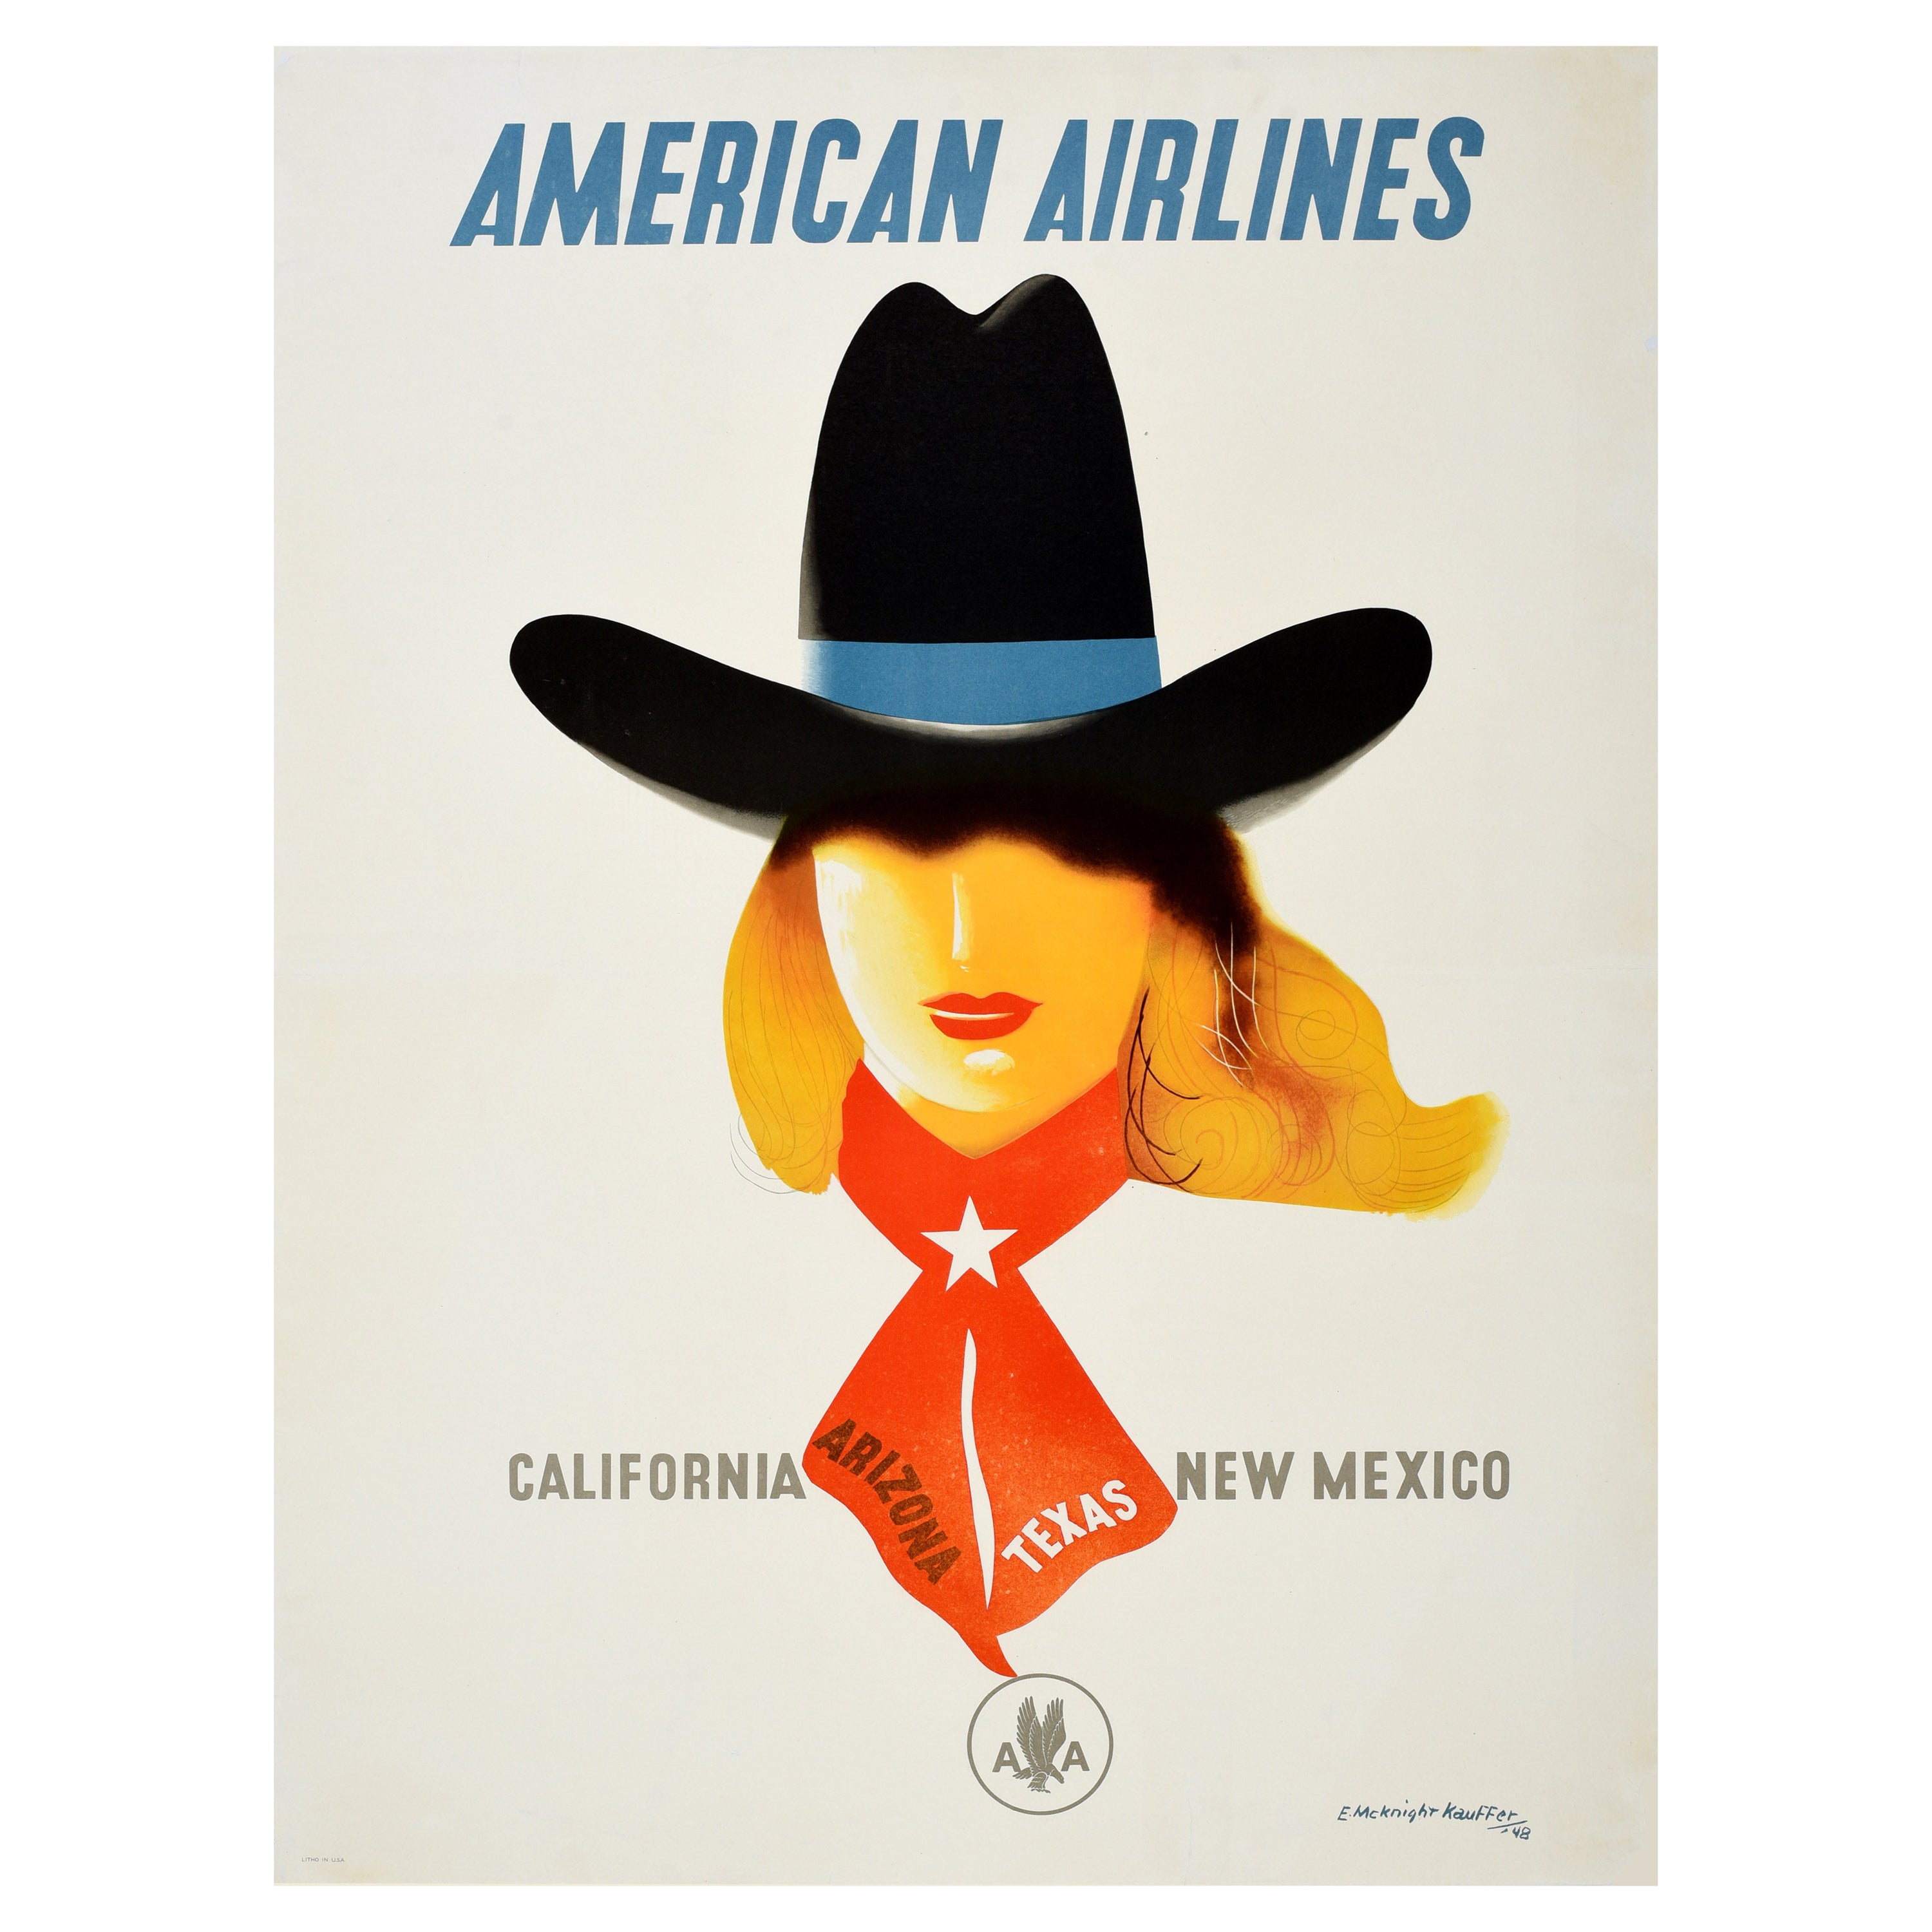 Original Vintage Travel Poster American Airlines California New Mexico Cowgirl